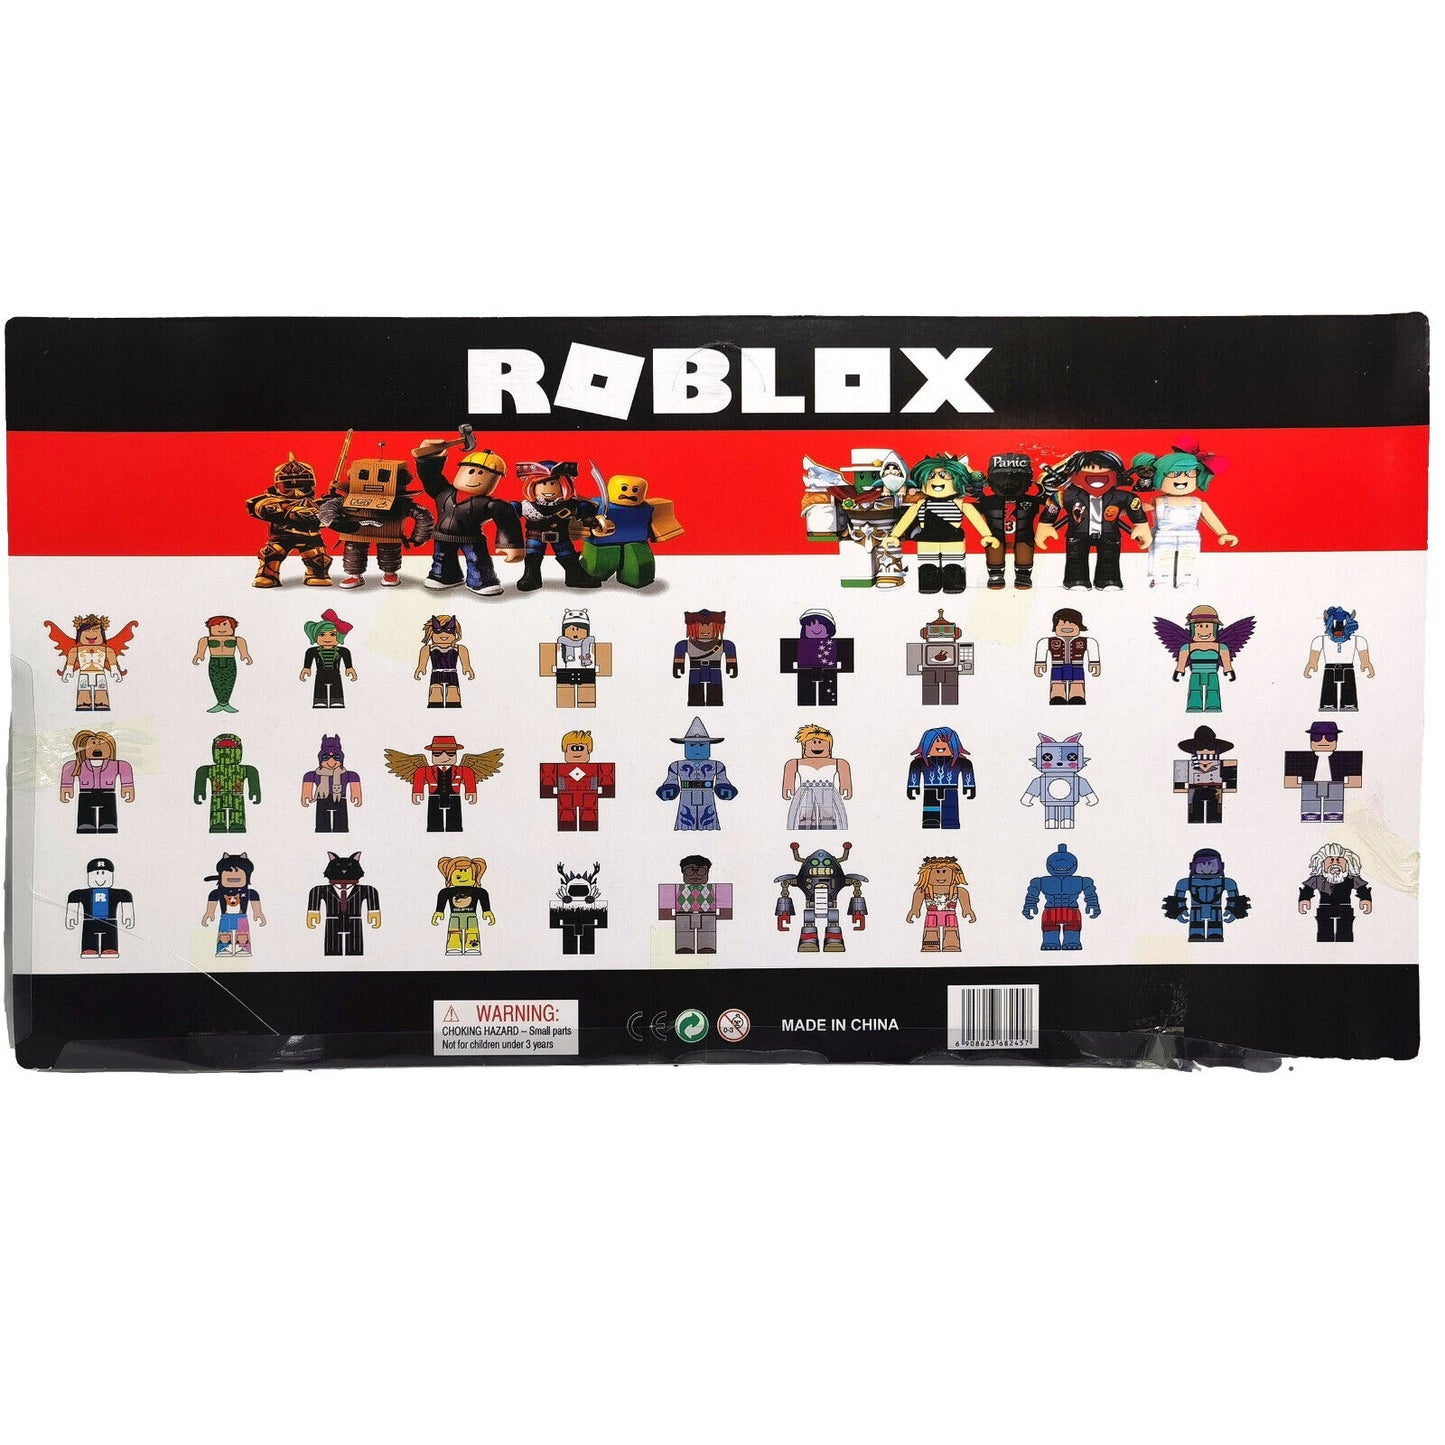 Roblox 8cm 7pcs Action Figure Pack Collection Playset toy - Homeware Discounts